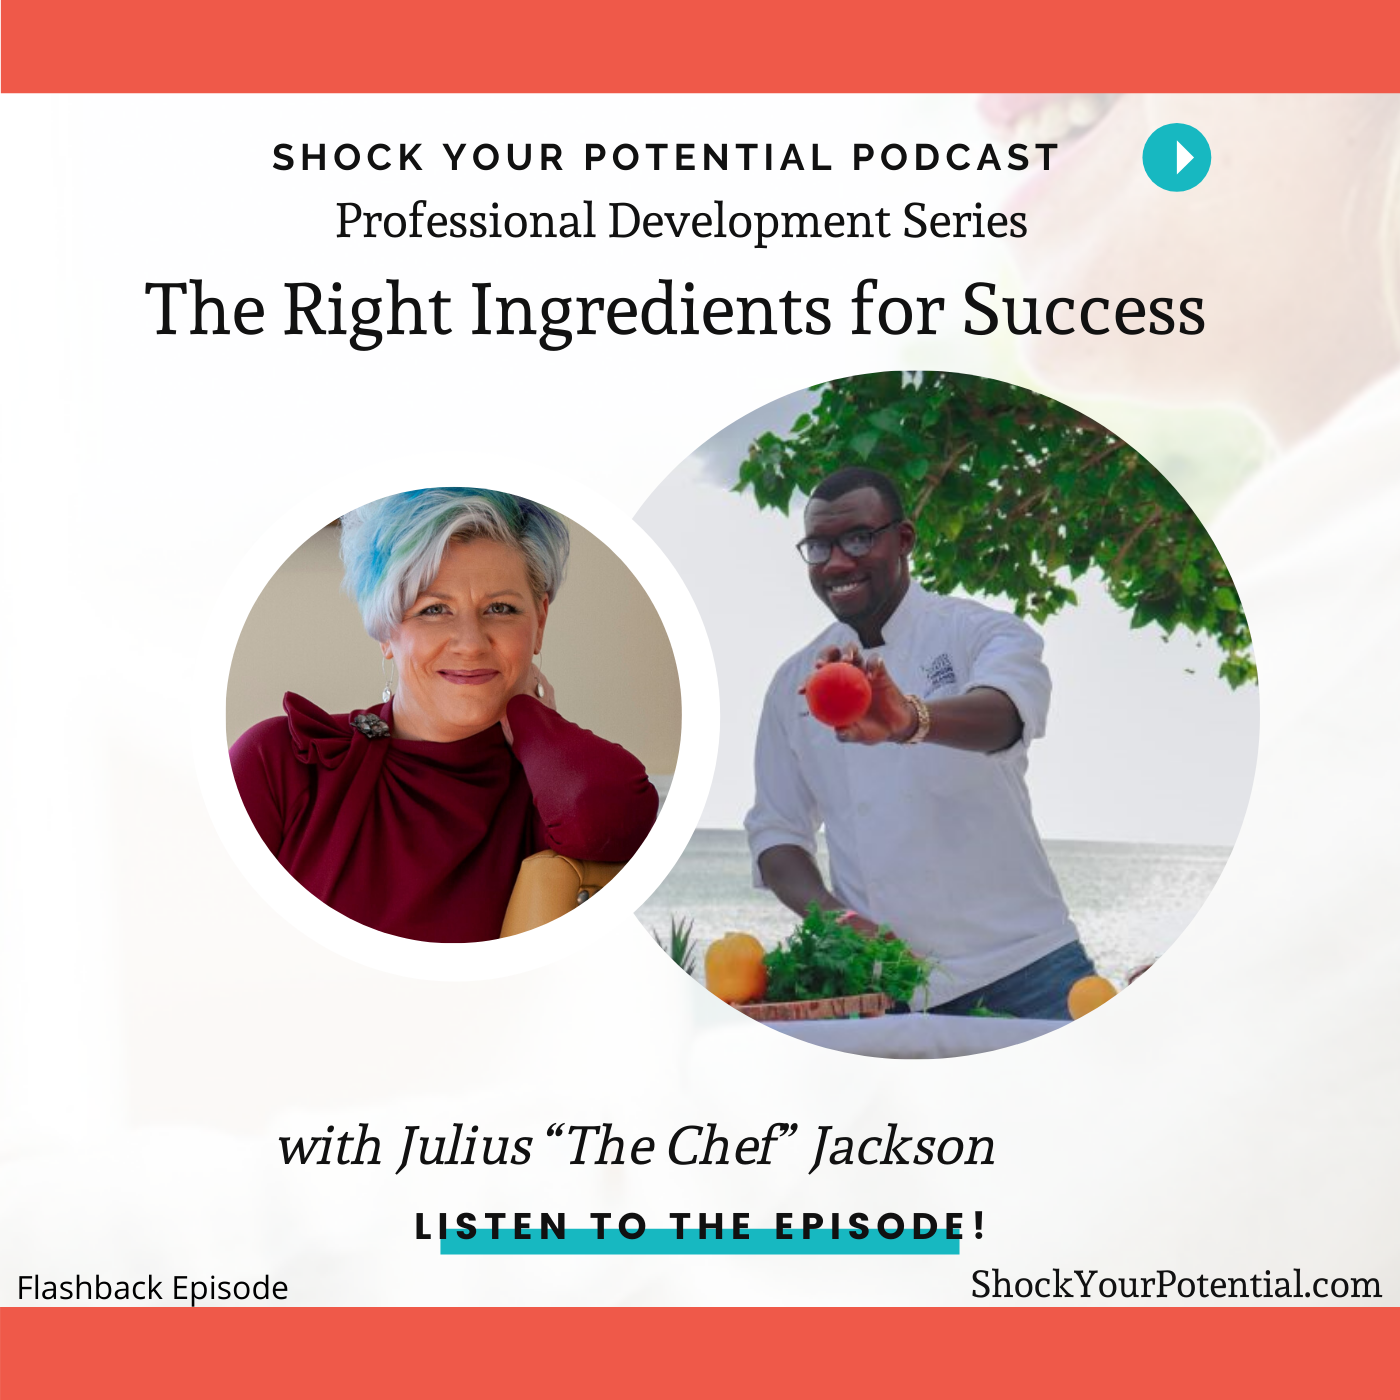 The Right Ingredients for Success – Julius “The Chef” Jackson